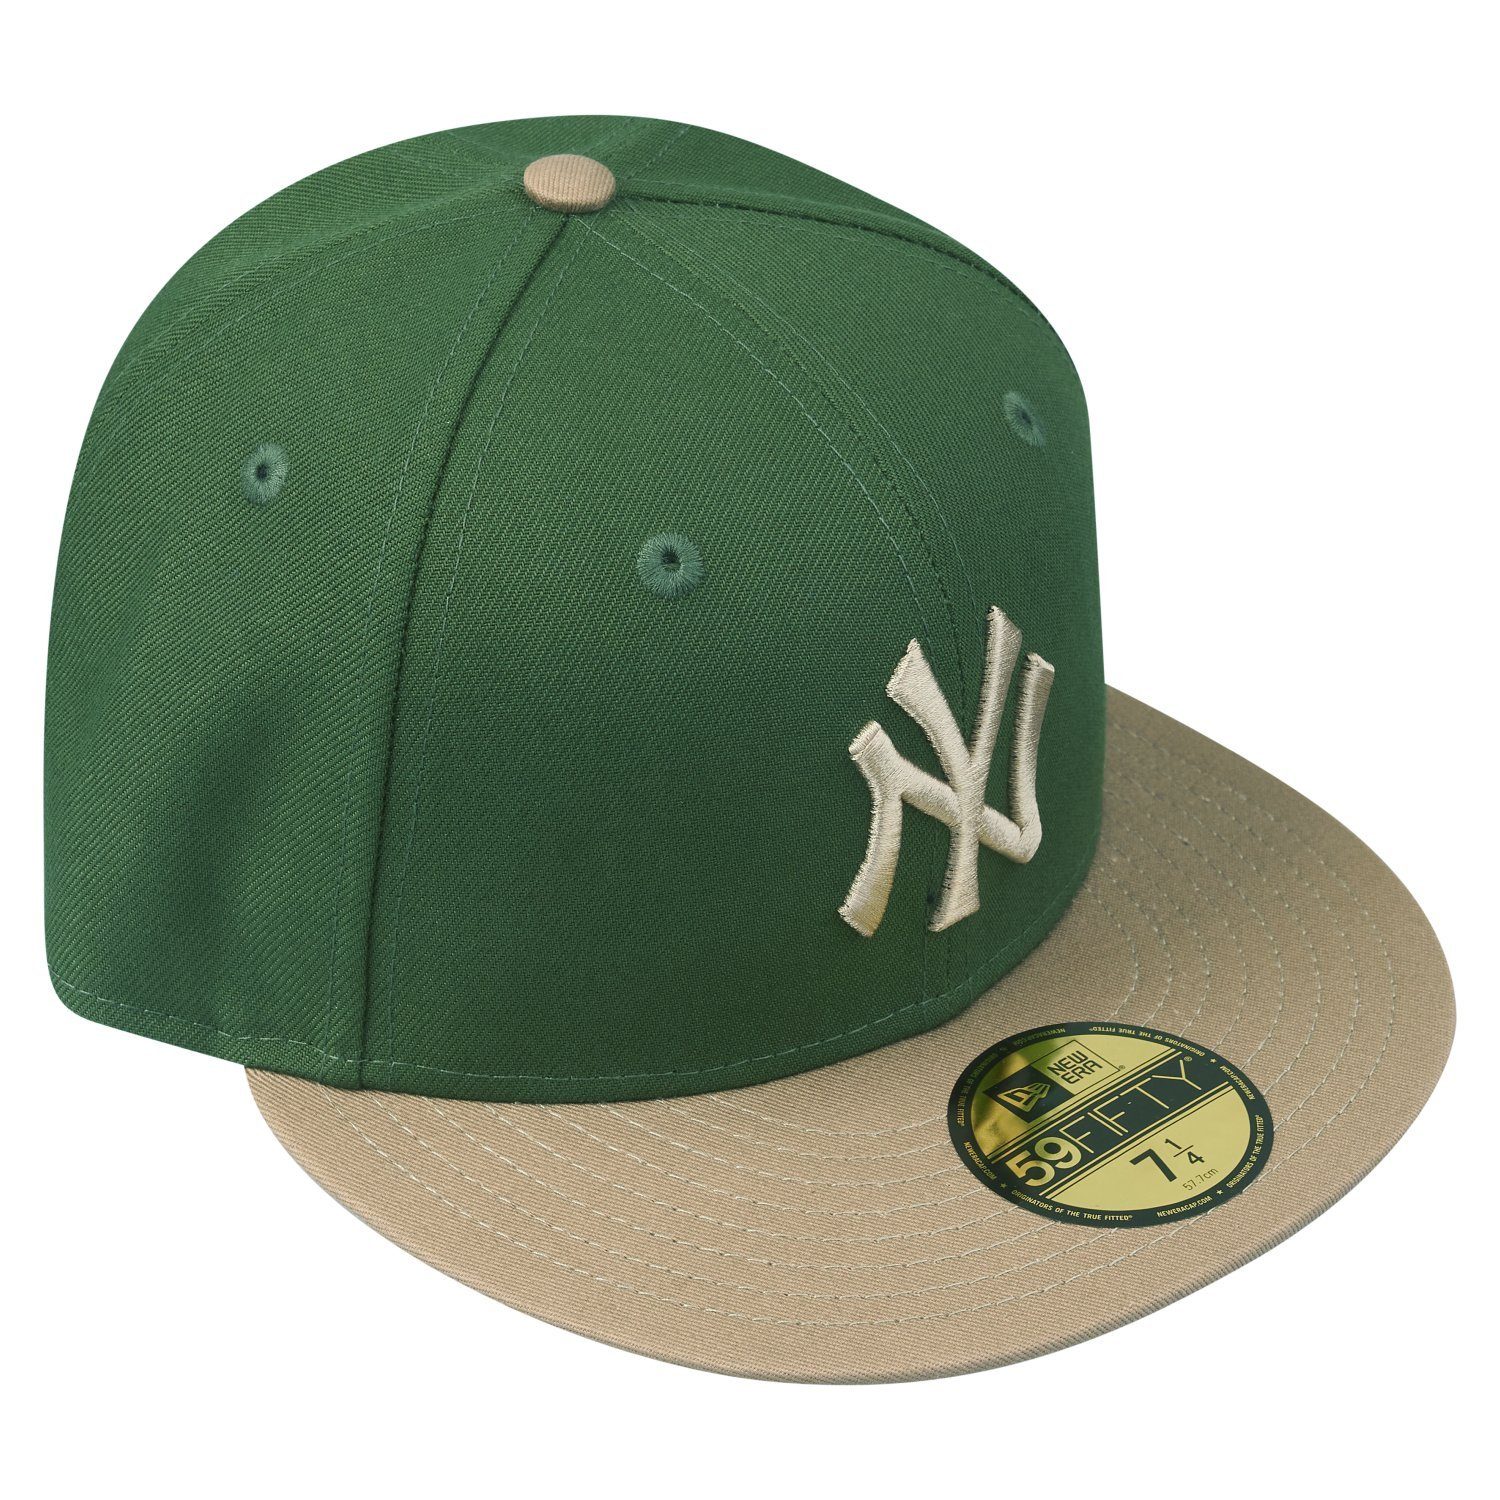 New Era Fitted Cap New 59Fifty Yankees York